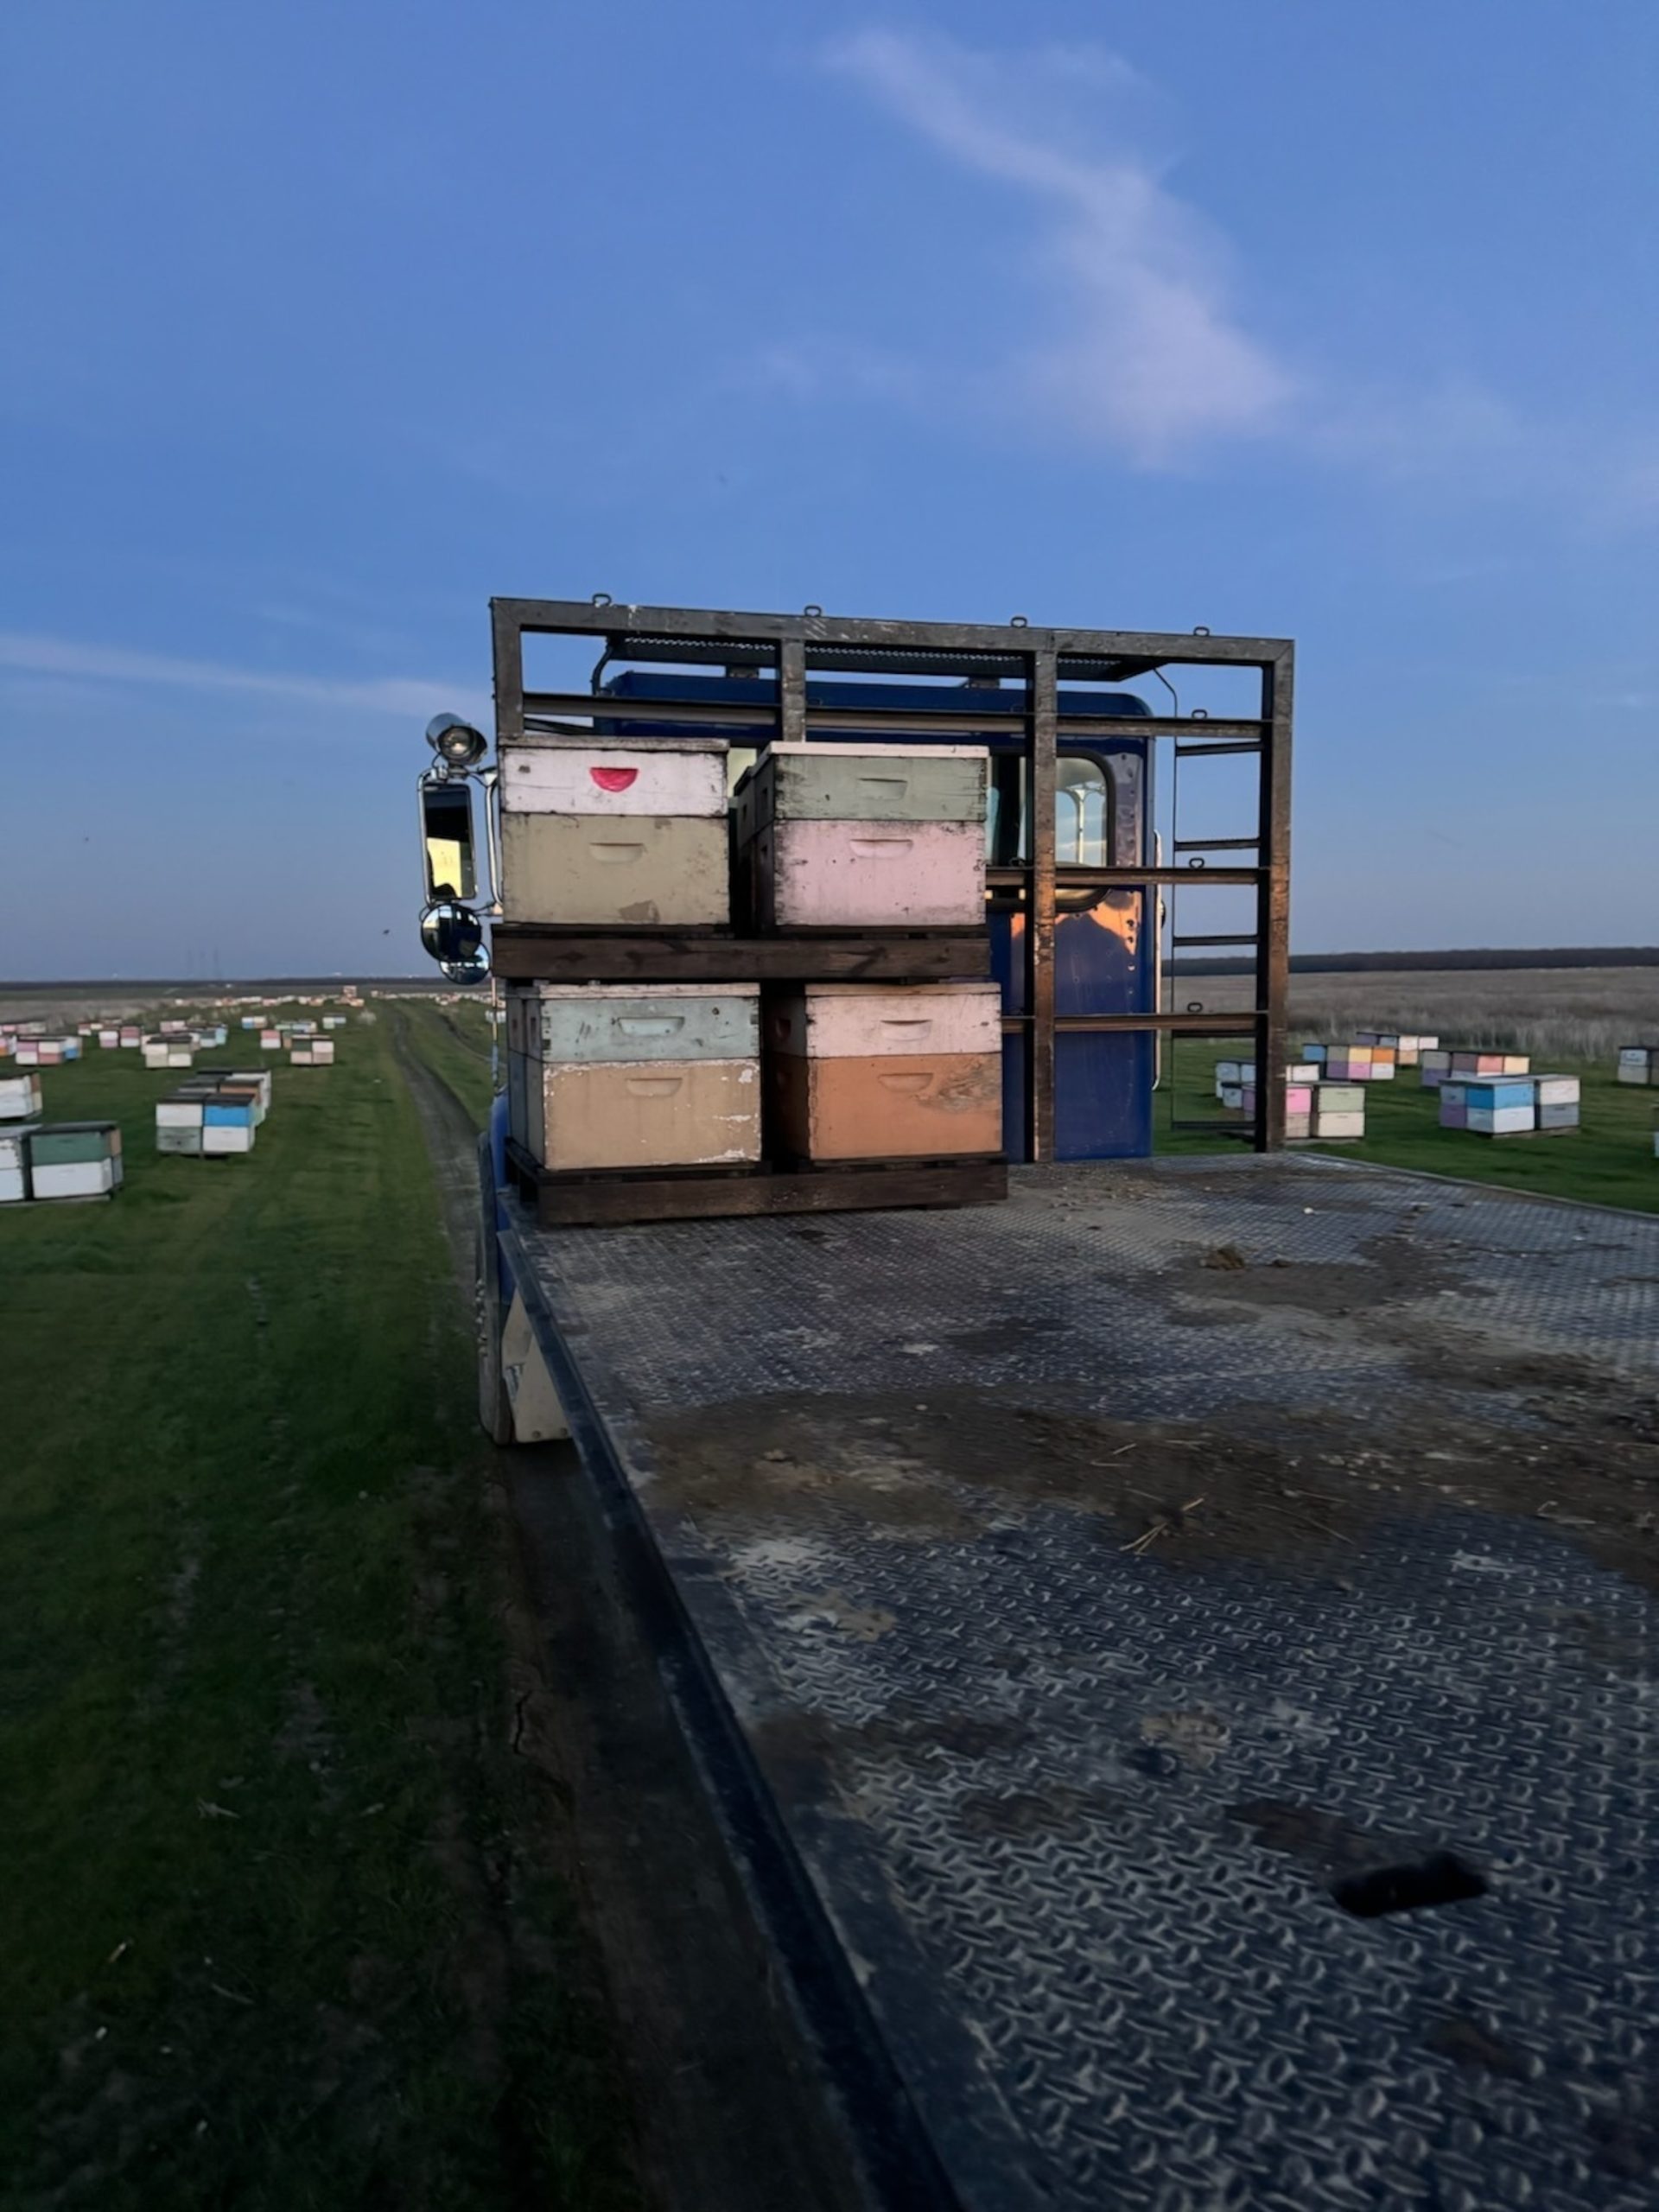 Theft Alert: Approximately 100 Beehives Stolen from Field in California's Central Valley